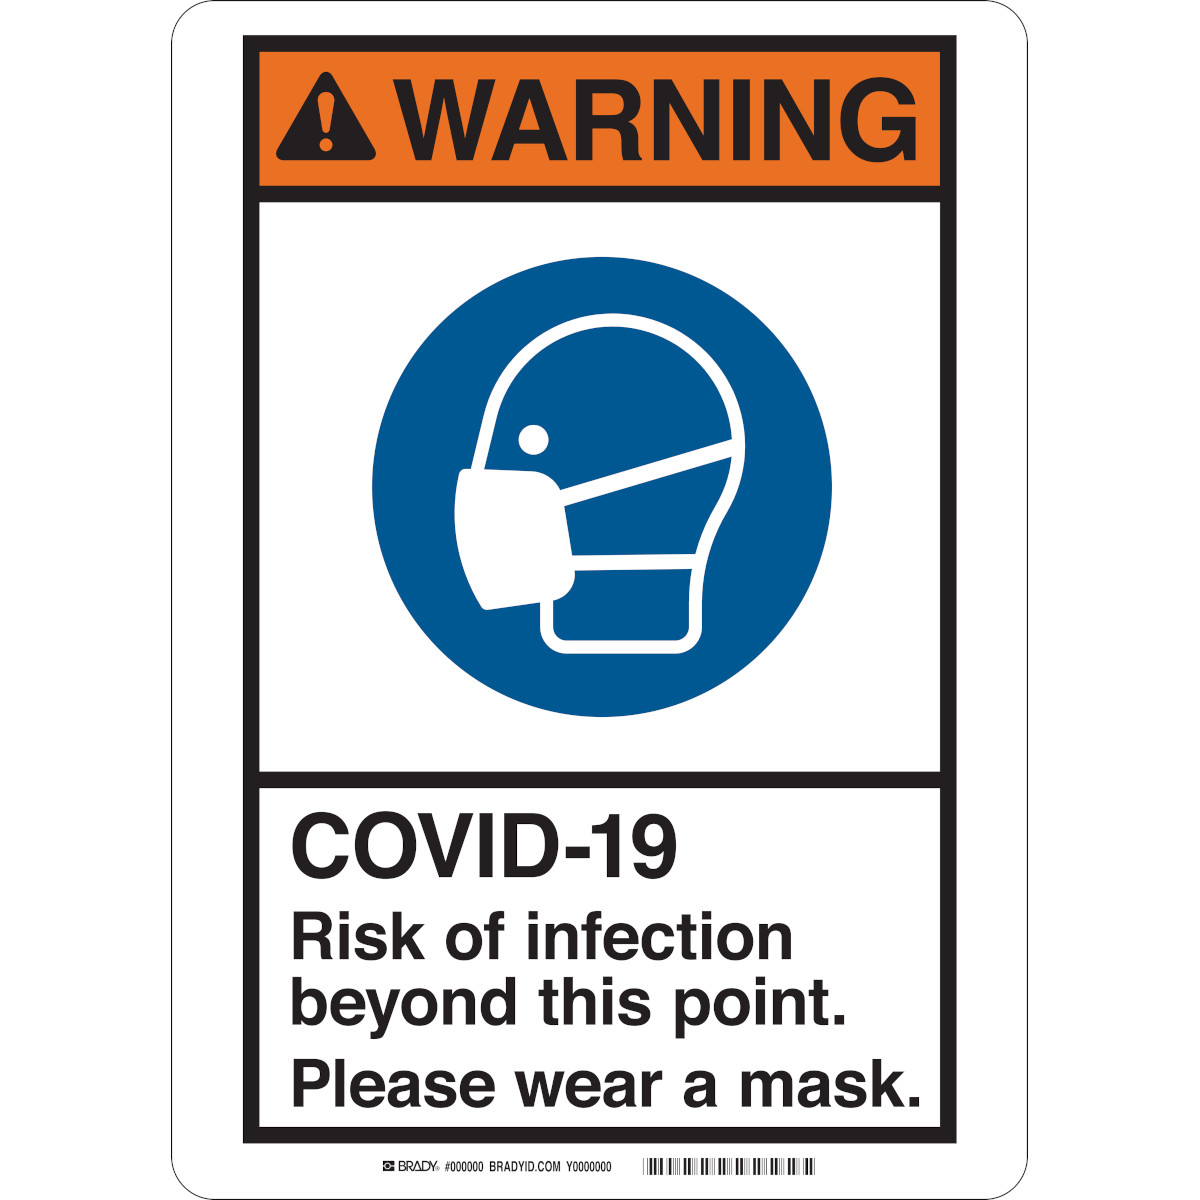 3 x ATTENTION WEAR A FACE MASK SIGN A4 LAMINATED INDOOR OUTDOOR 19COVID SAFETY